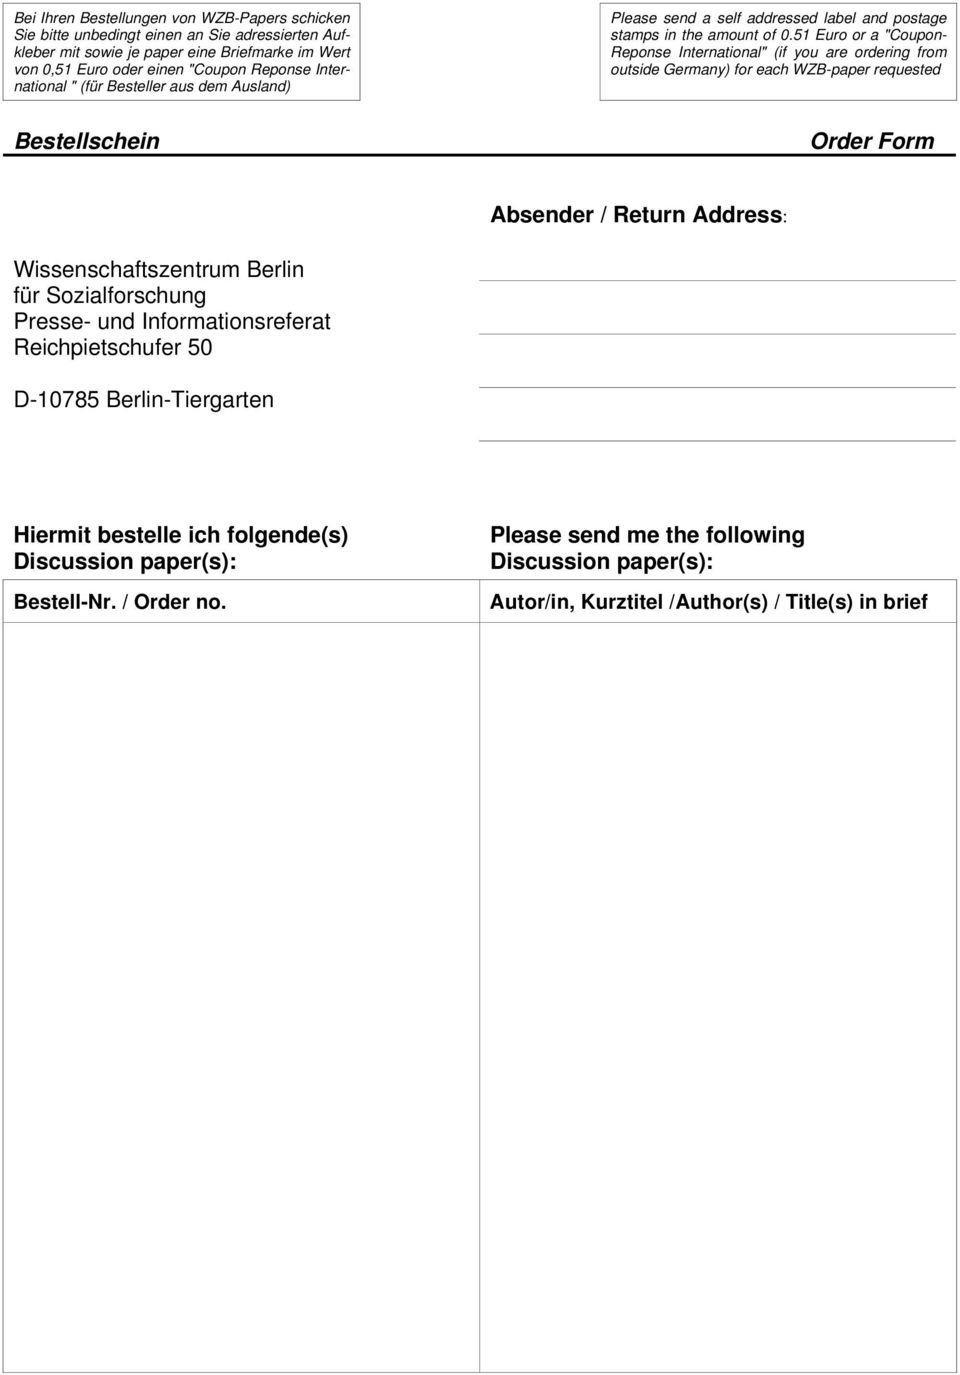 51 Euro or a "Coupon- Reponse International" (if you are ordering from outside Germany) for each WZB-paper requested Bestellschein Order Form Absender / Return Address: Wissenschaftszentrum